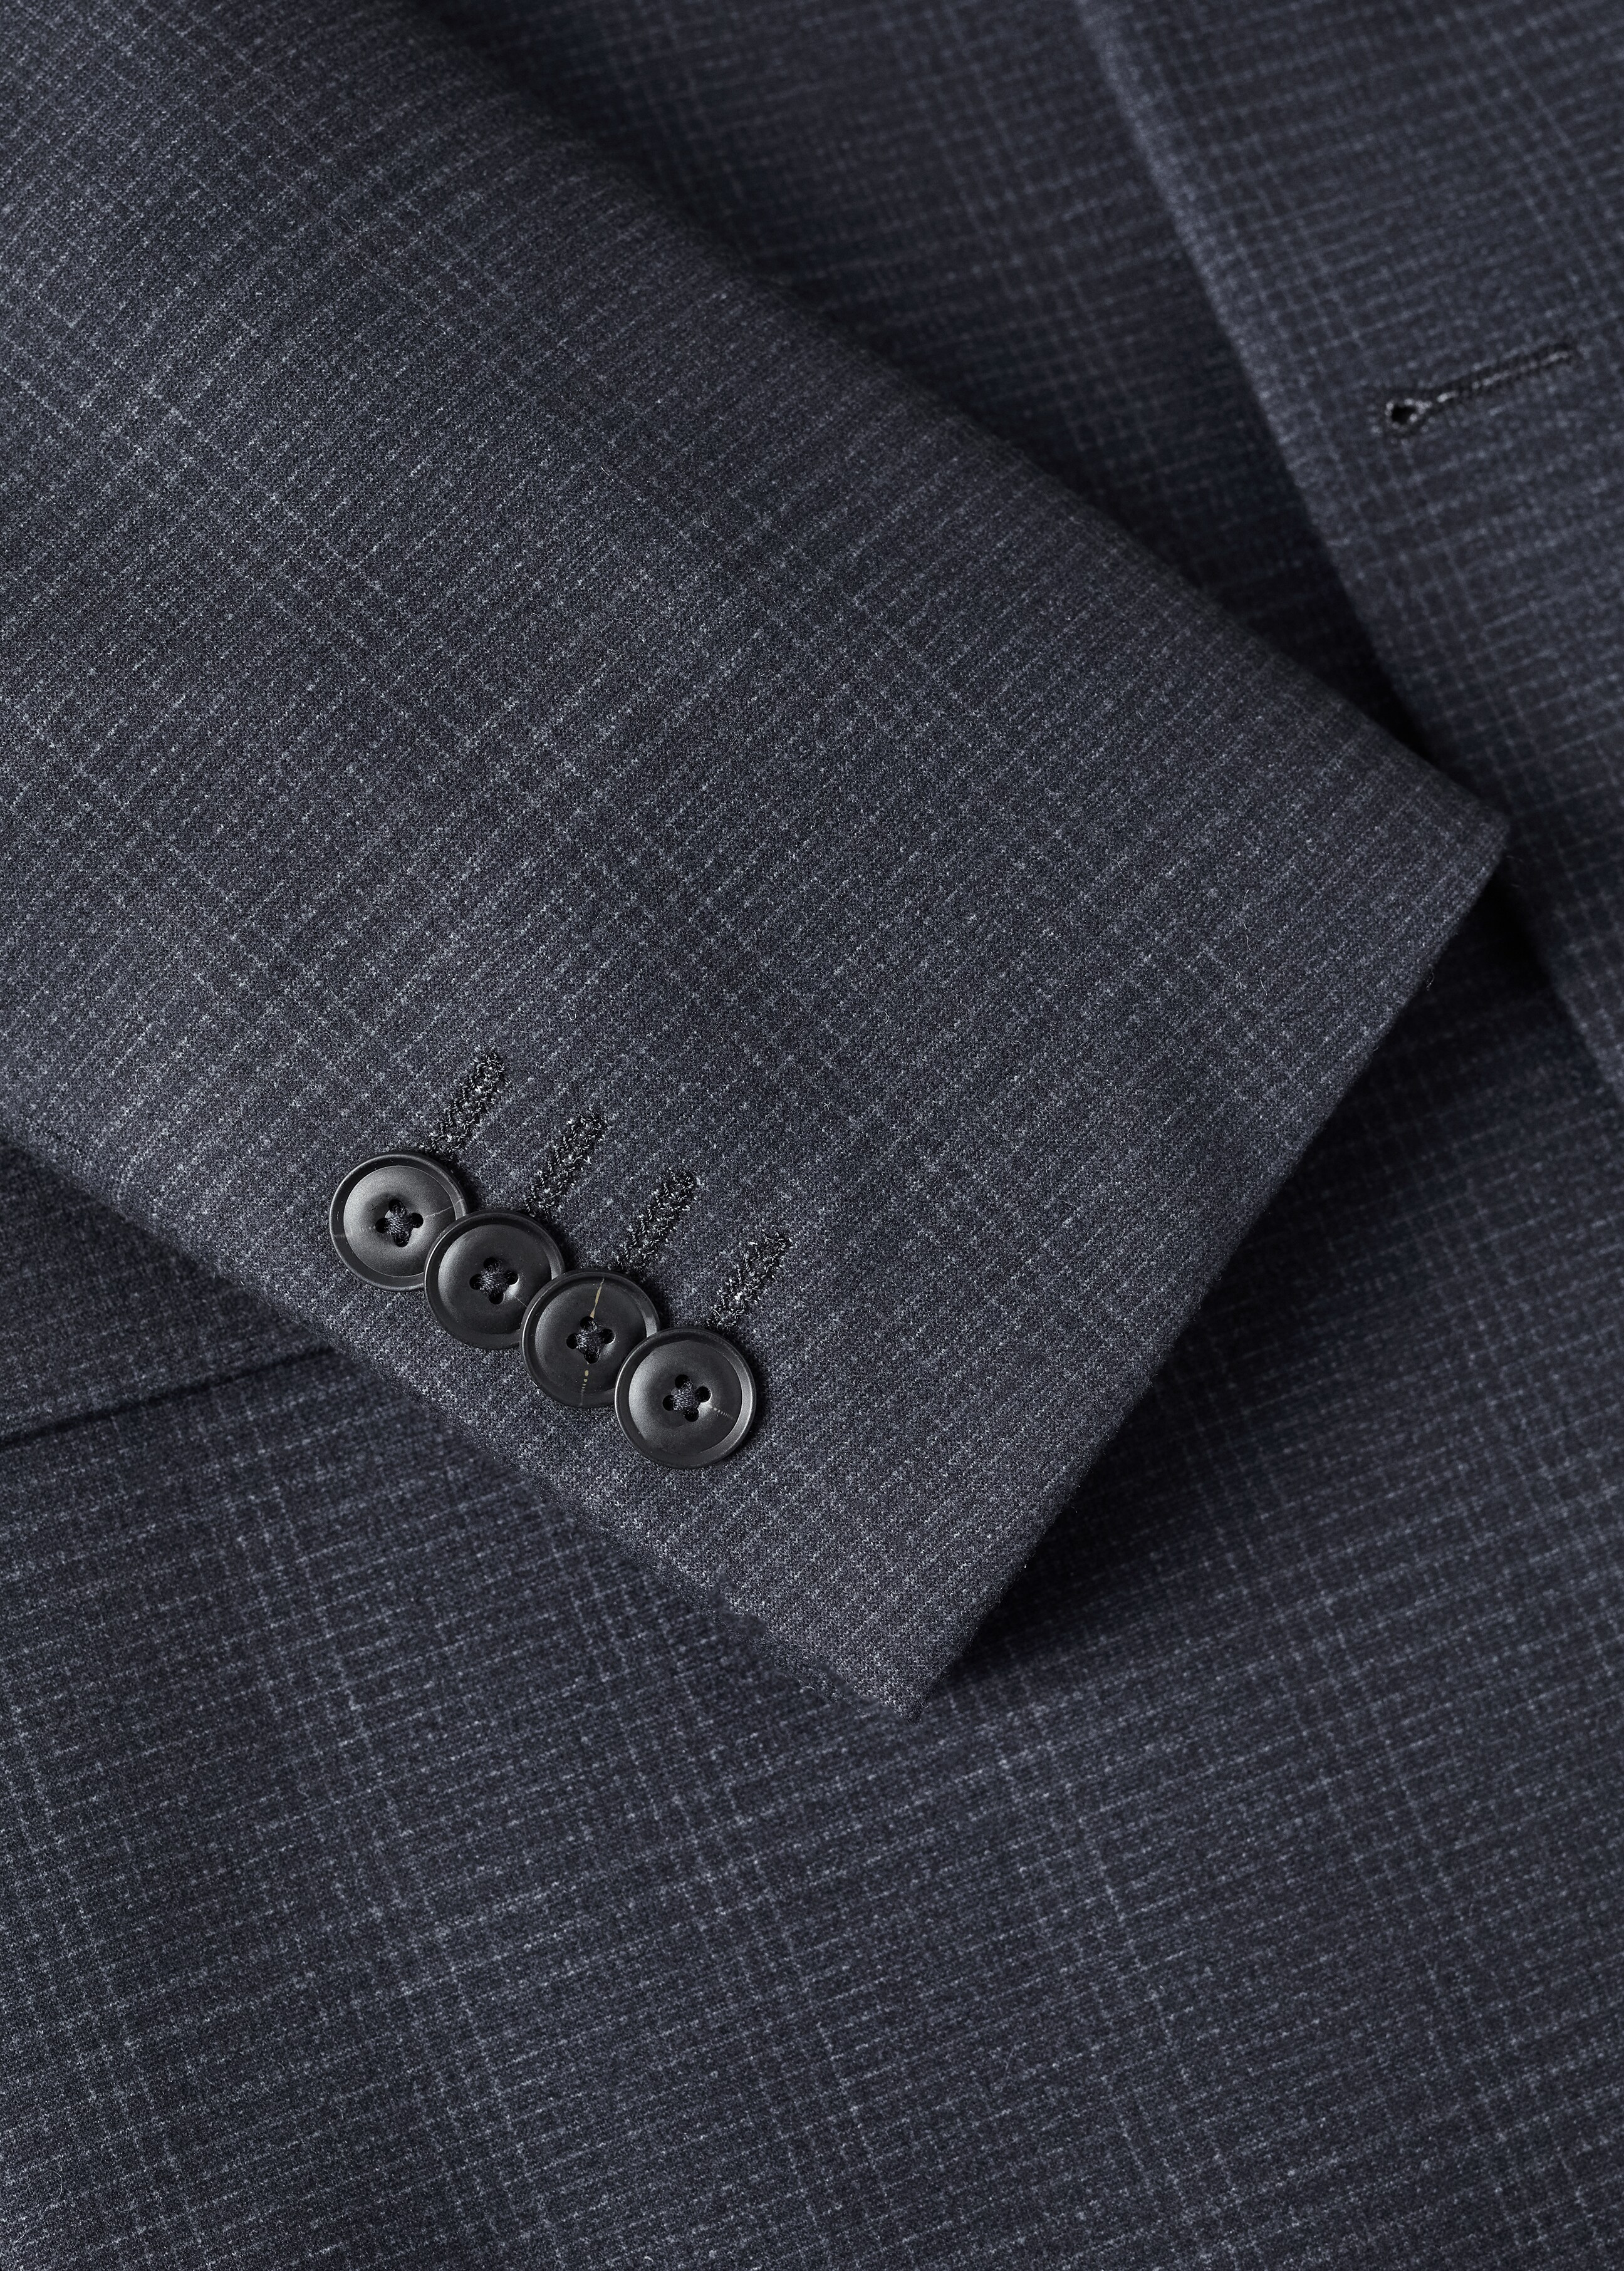 Prince of Wales blazer - Details of the article 8